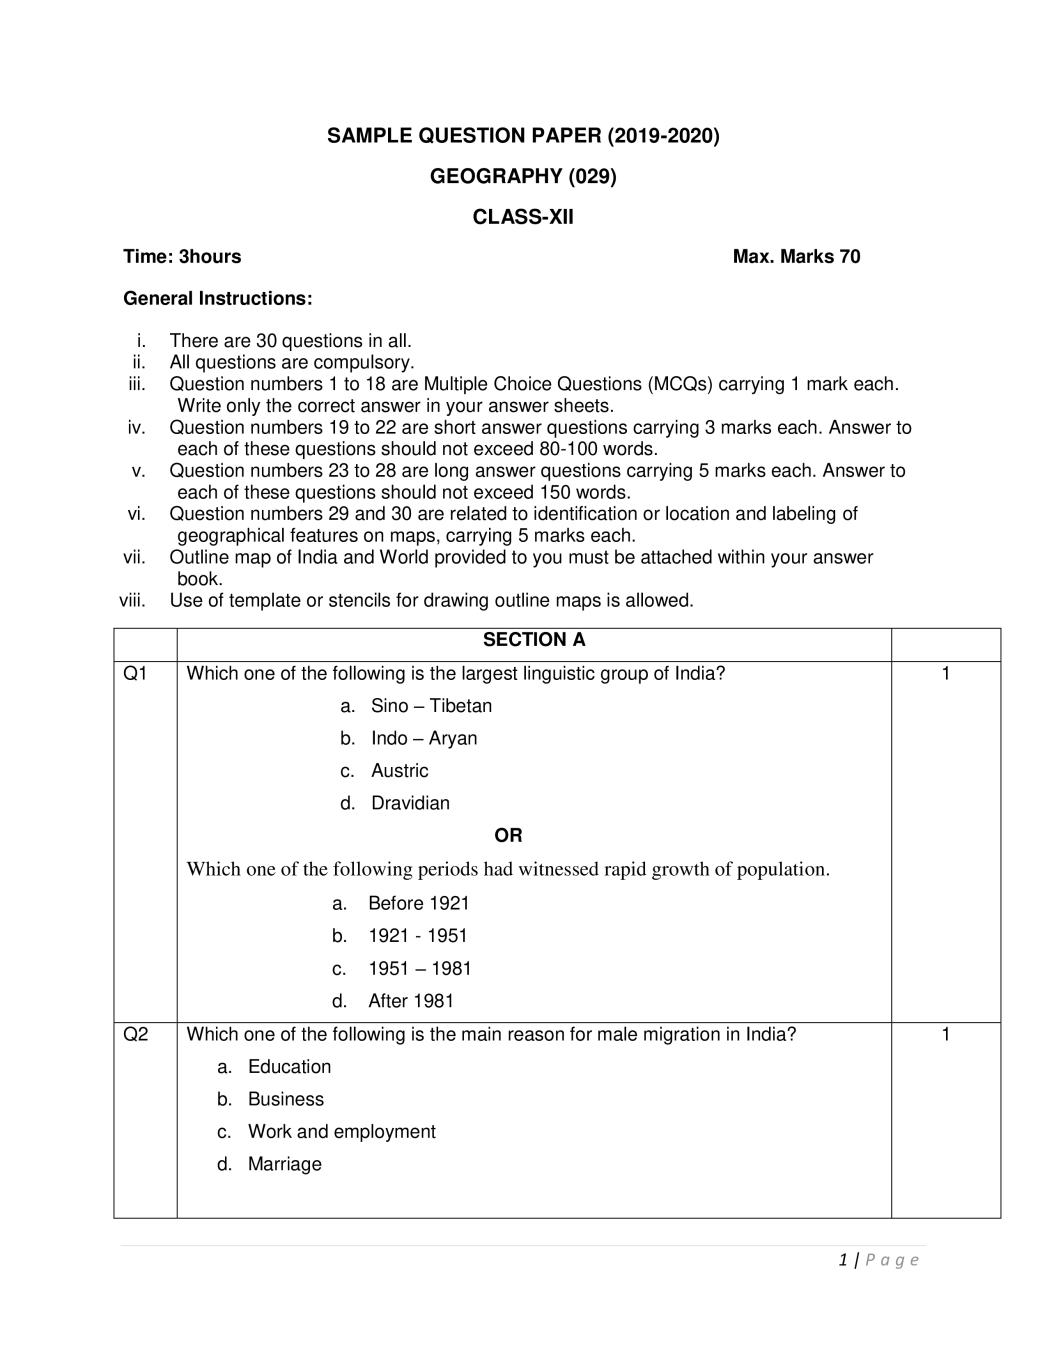 CBSE Class 12 Sample Paper 2020 for Geography - Page 1